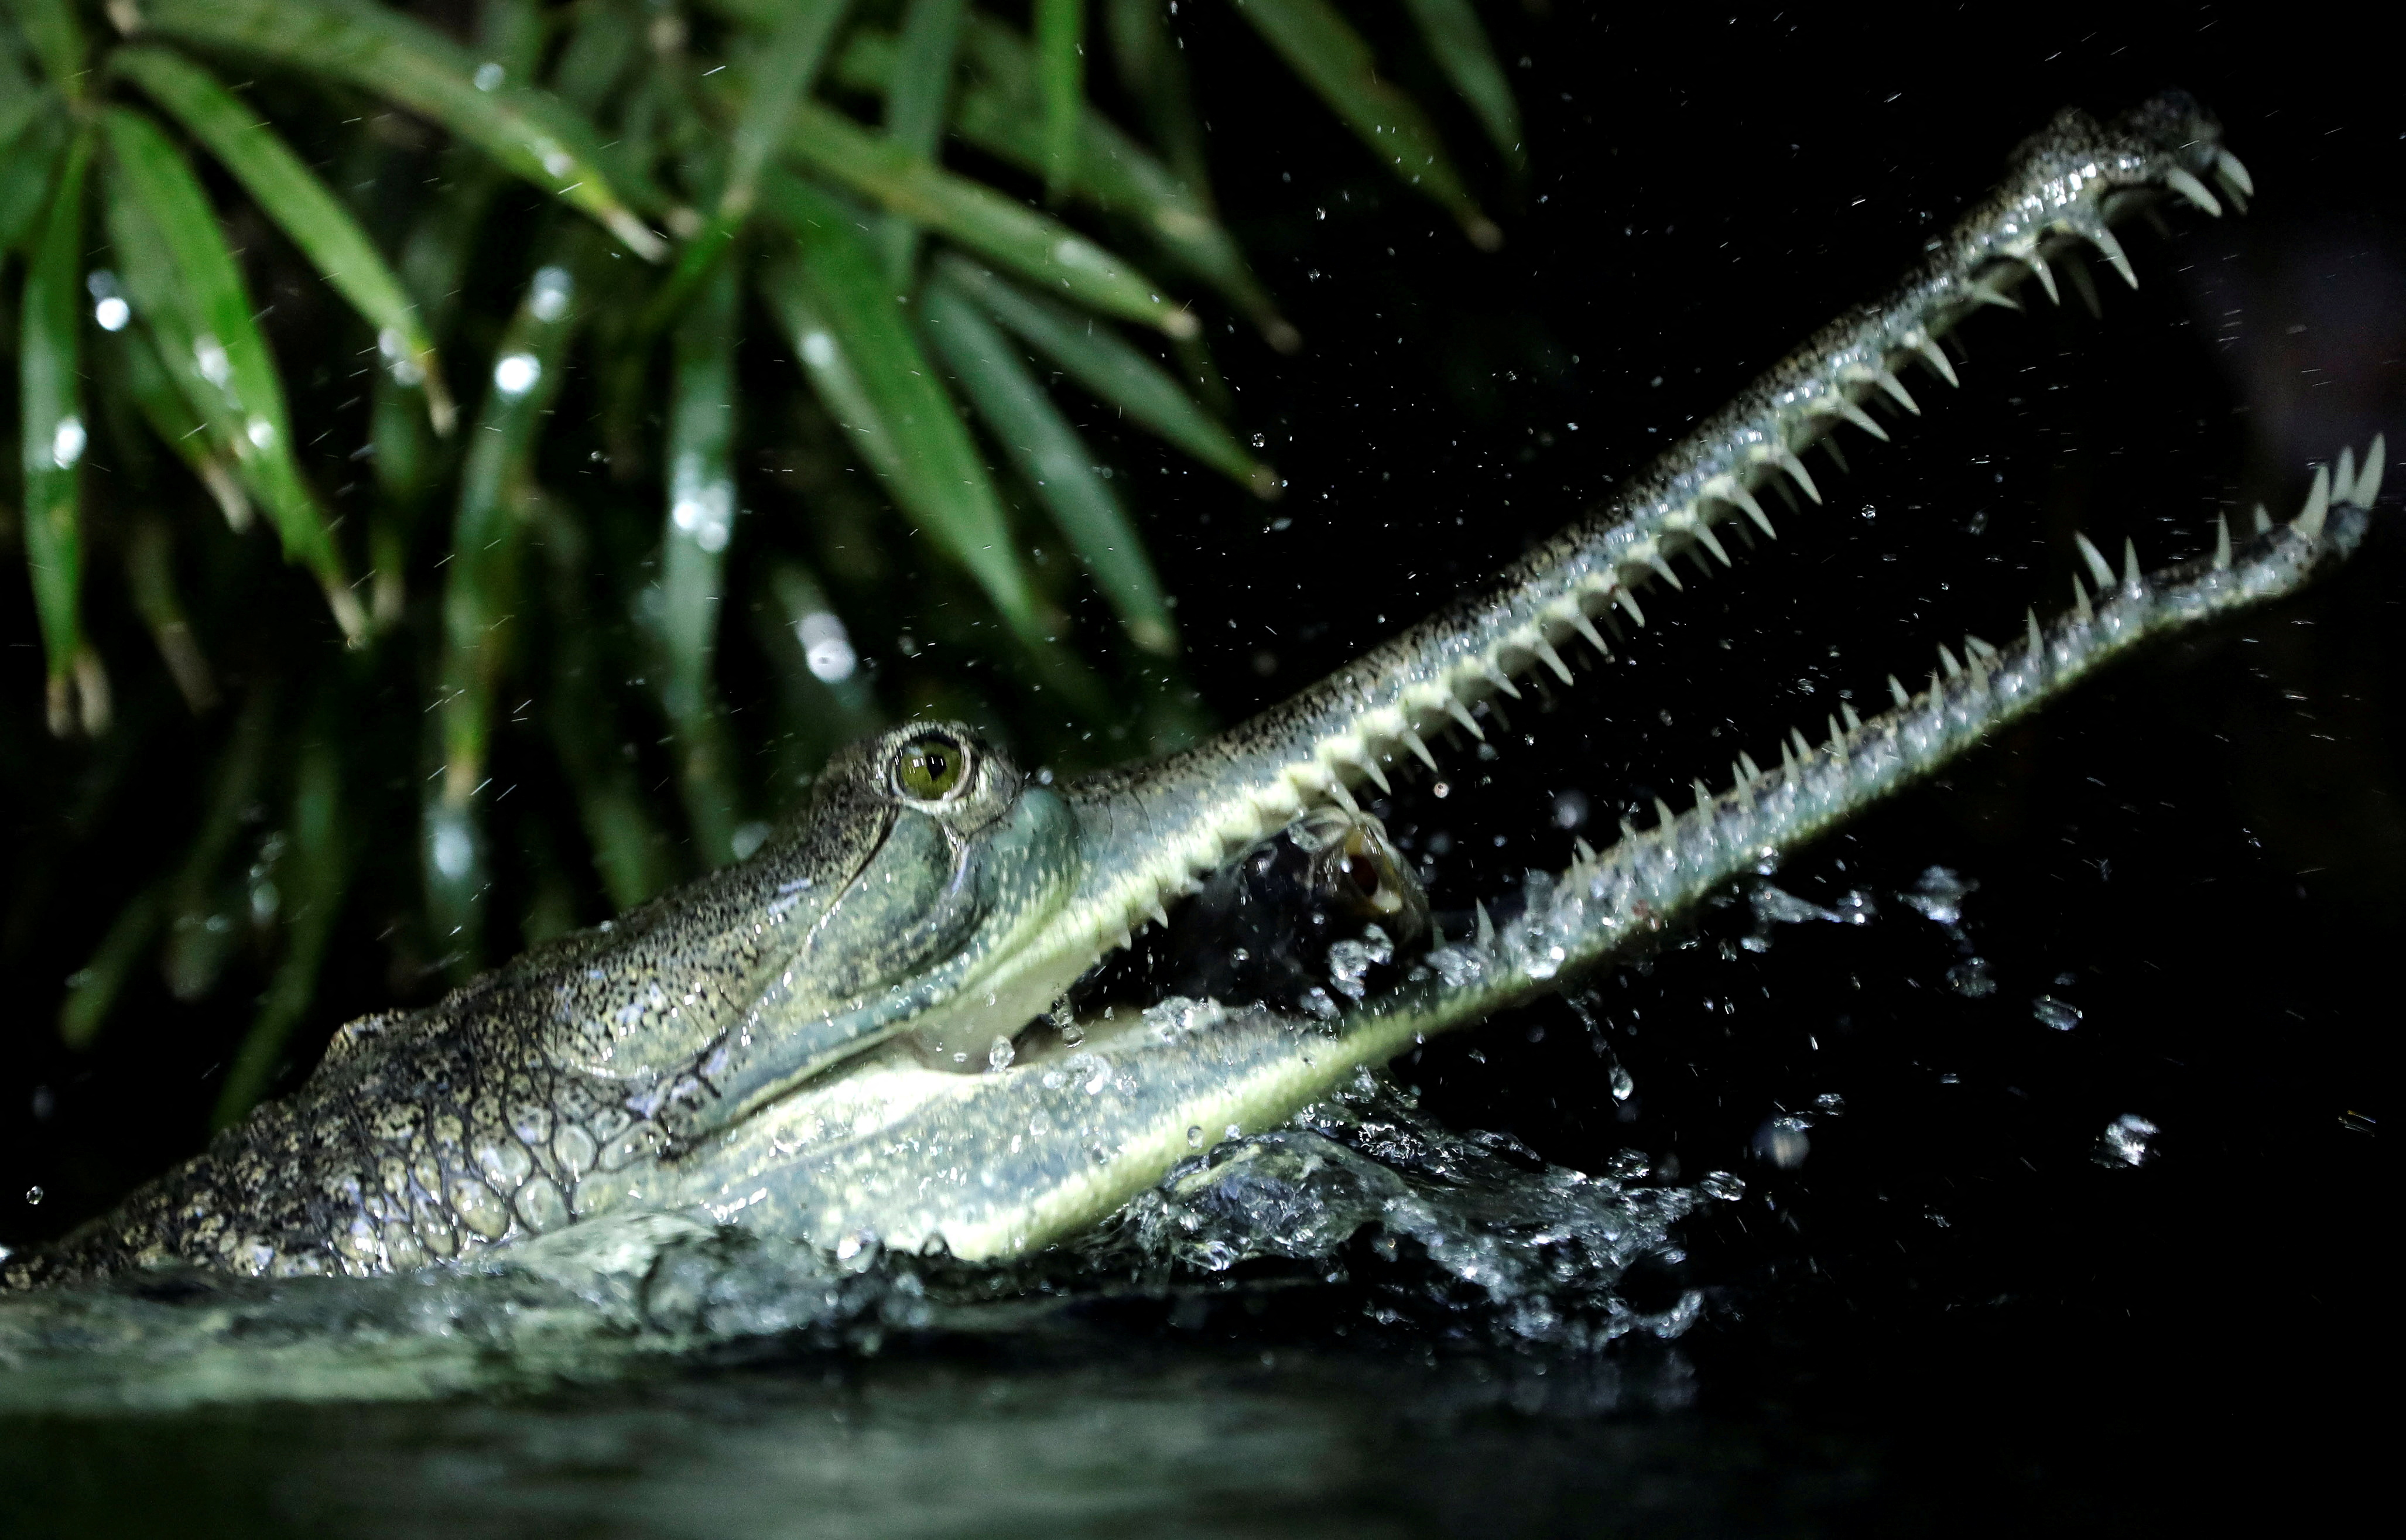 An Indian gharial eats a fish in a pool at the Prague Zoo